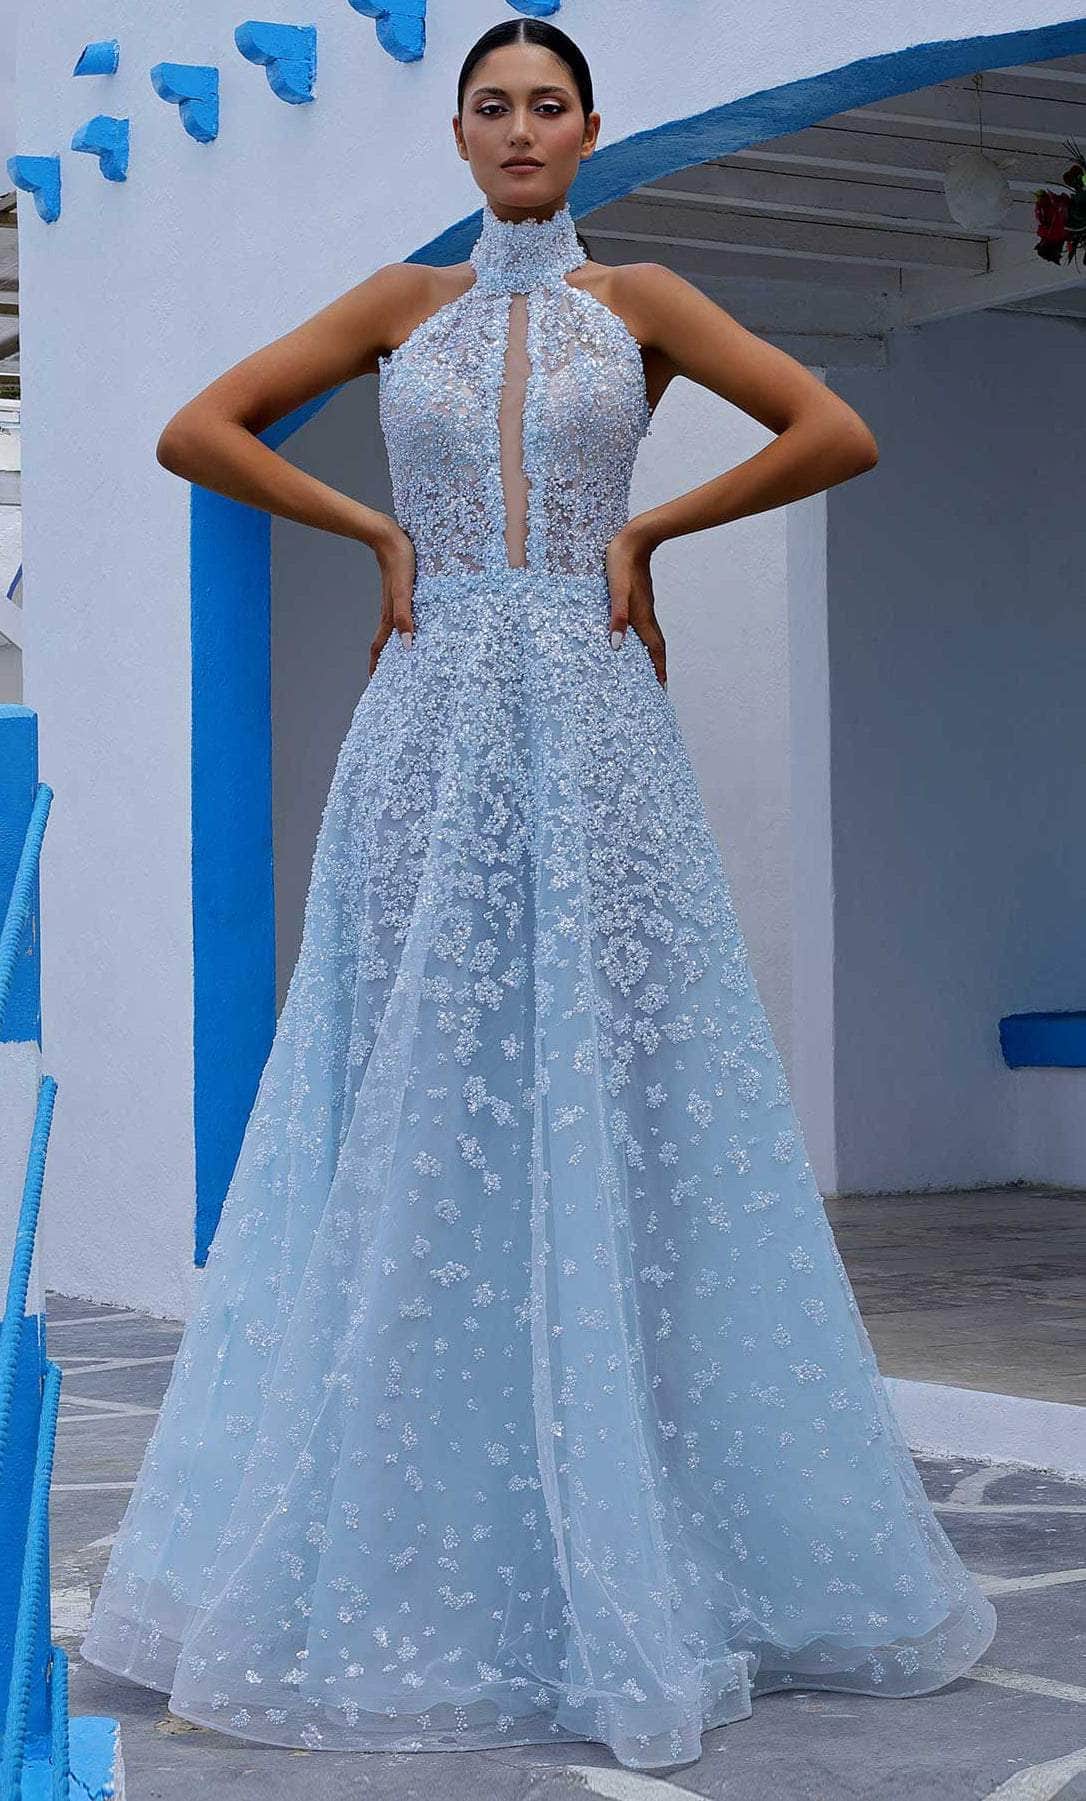 MNM Couture K3997 - High-Neck Beaded Prom Gown
